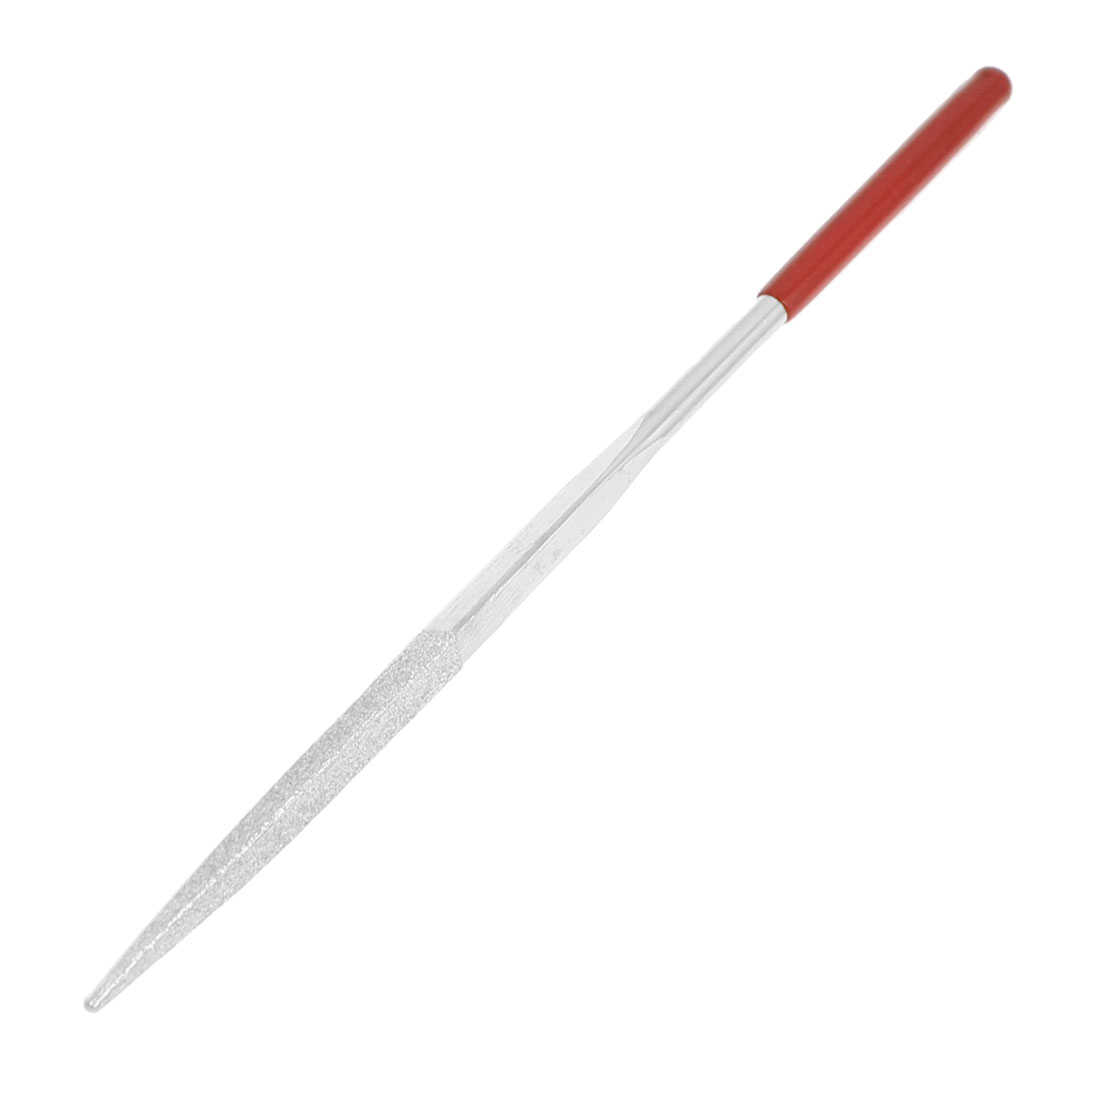 Woodwork 4mm x 160mm Three Square Triangle Needle Files Red Silver Tone